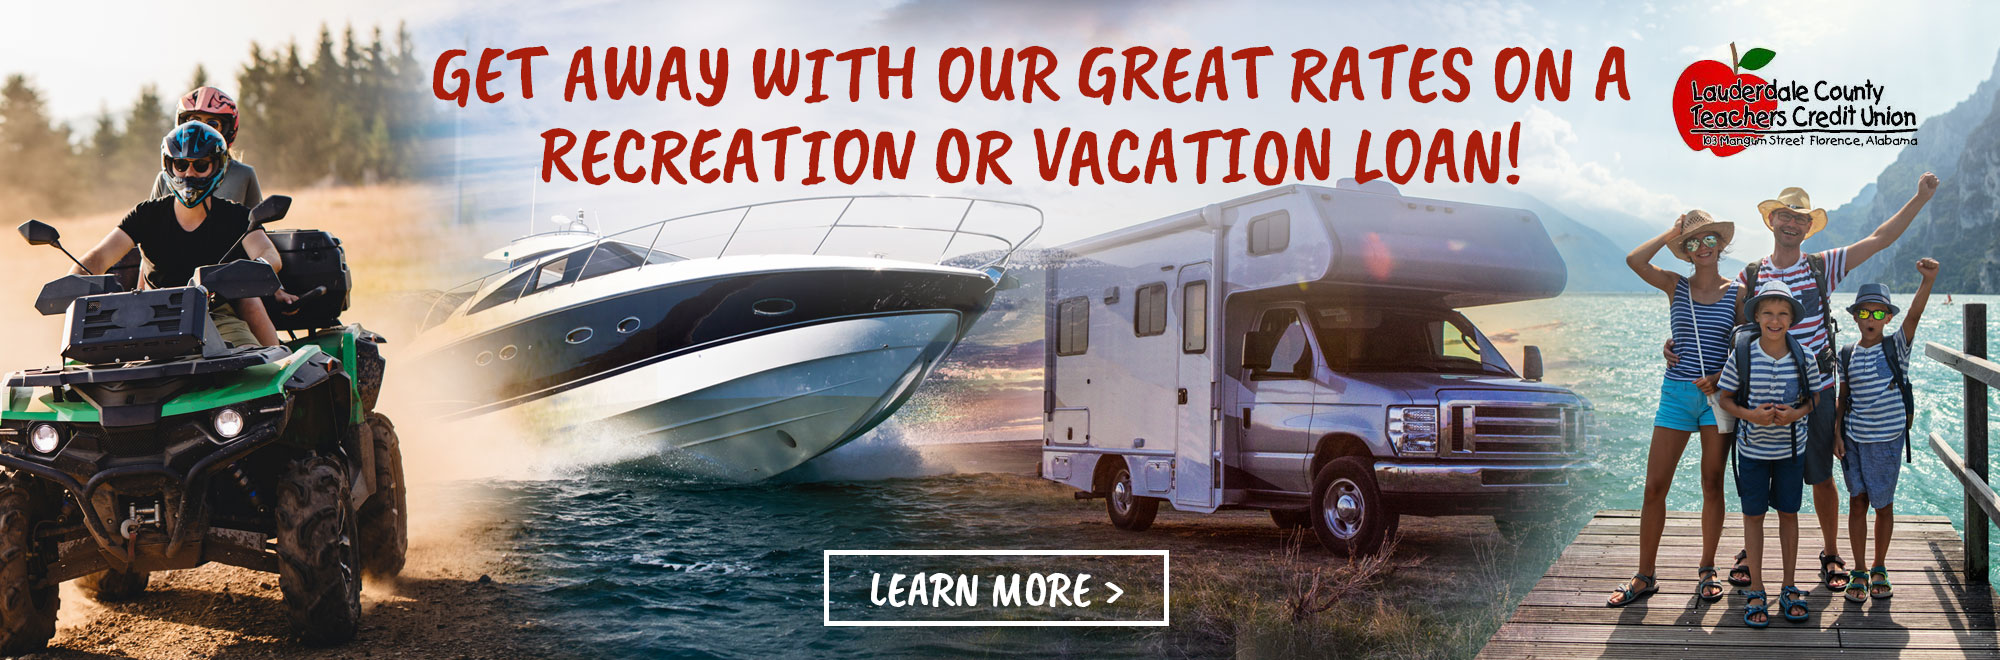 Get Away with our great rates on a recreation or vacation loan